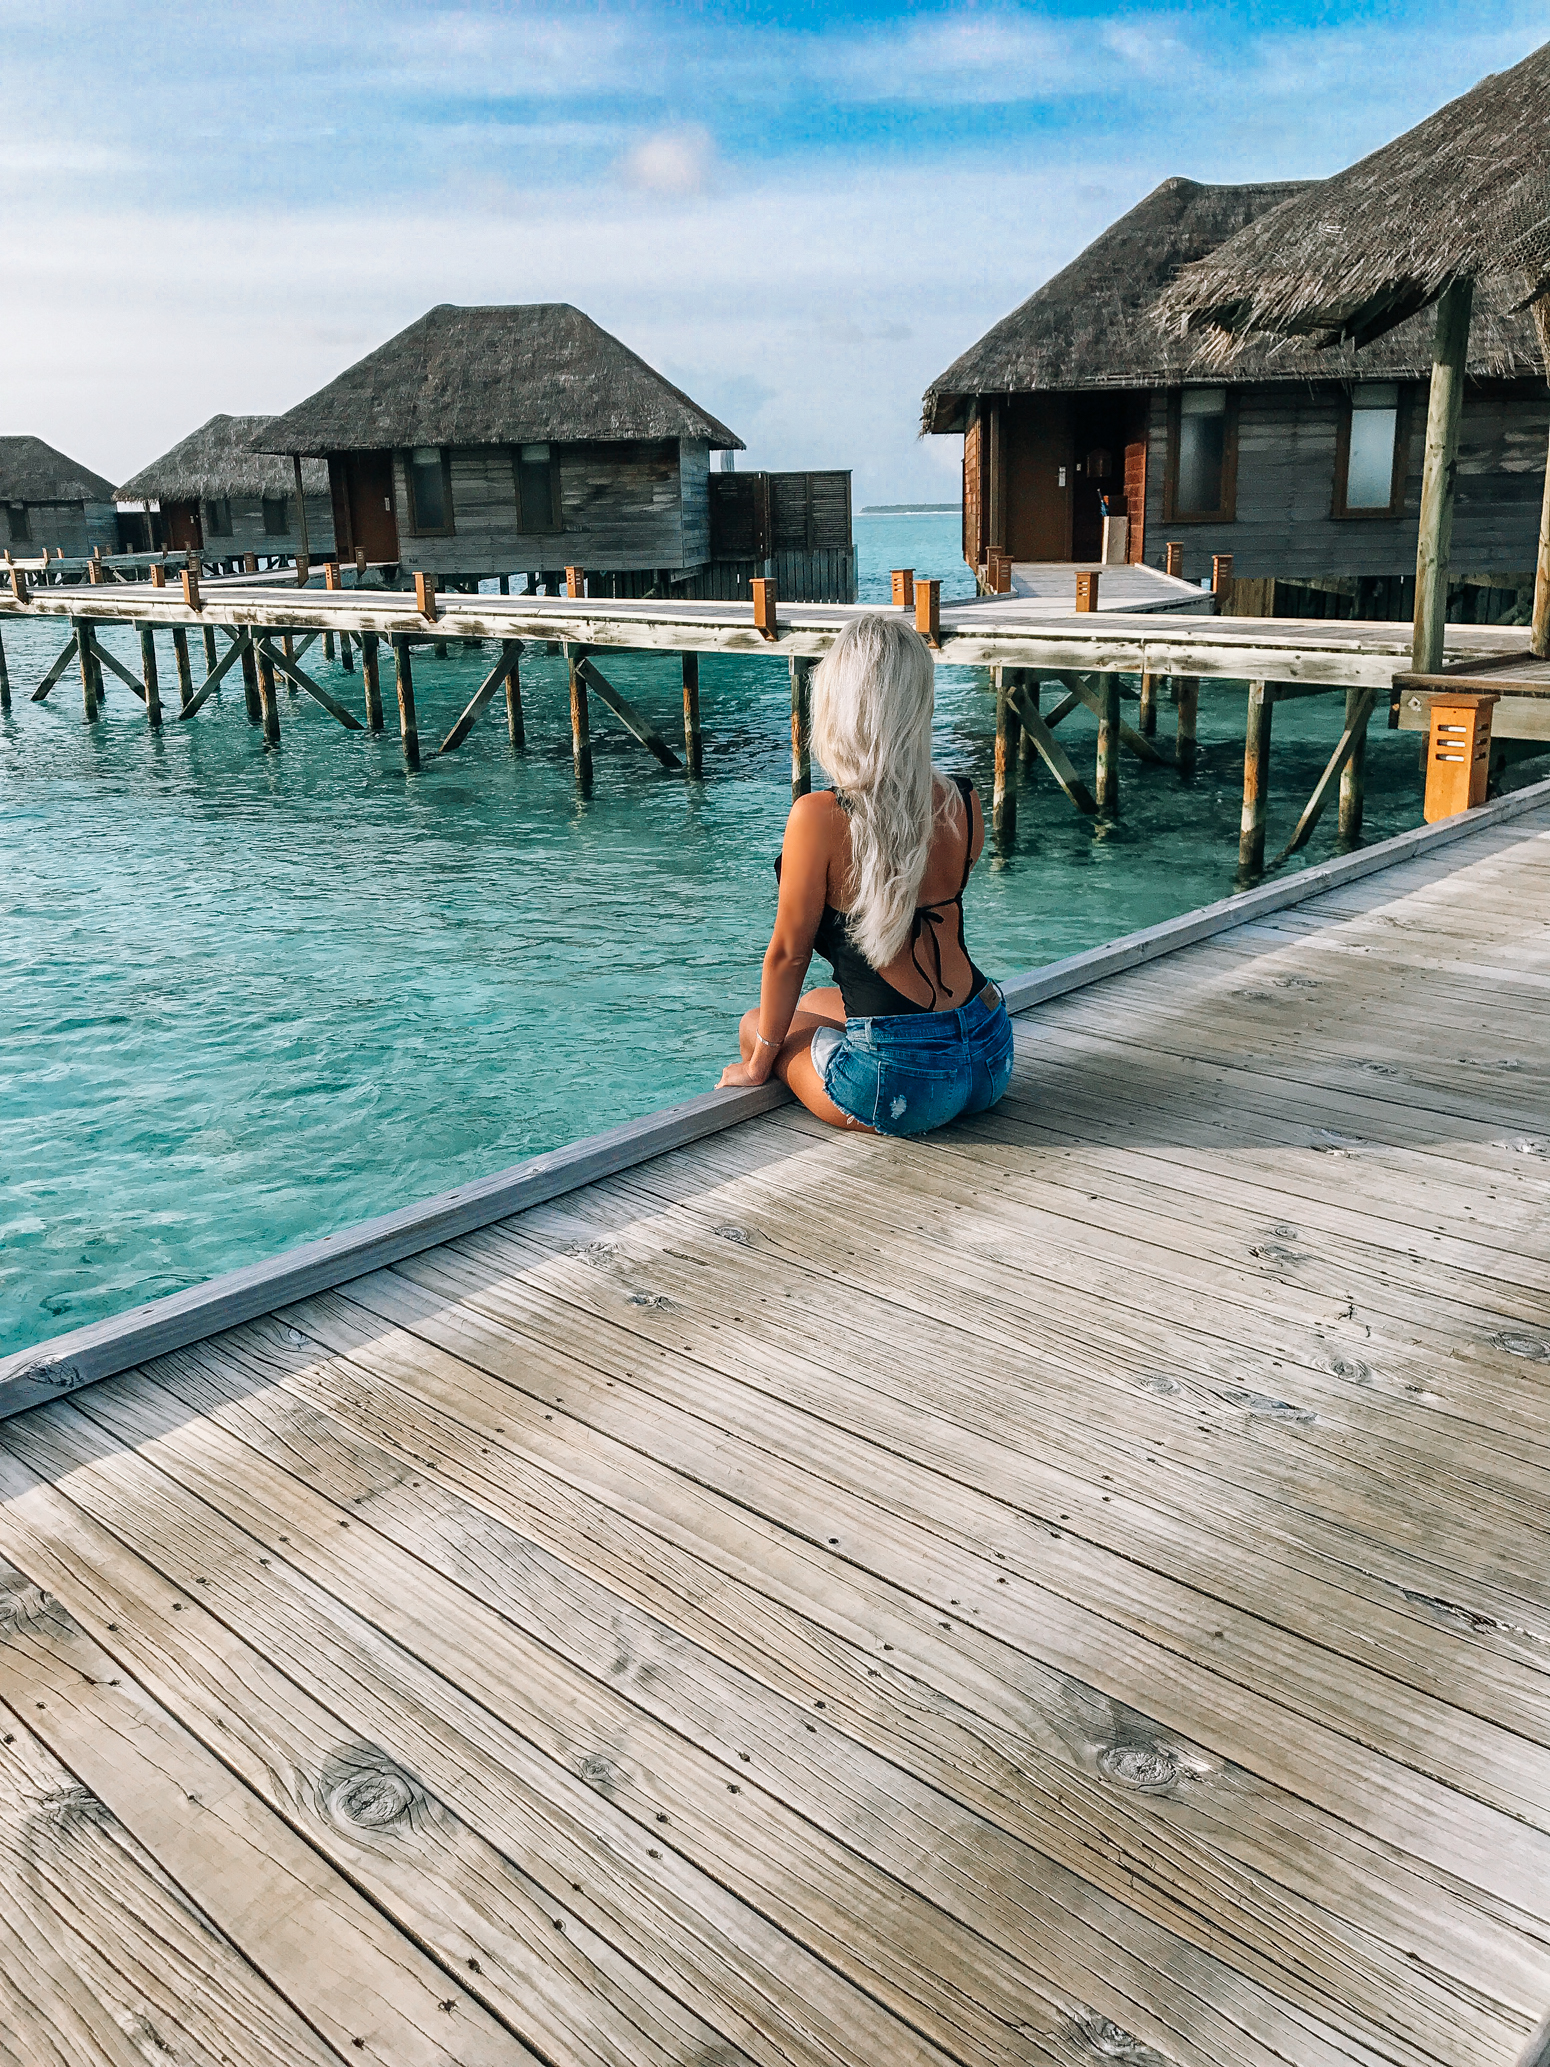 Blondie in the City | Honeymoon Vibes | The Maldives | Married Life | Becca Swim @beccabyrv